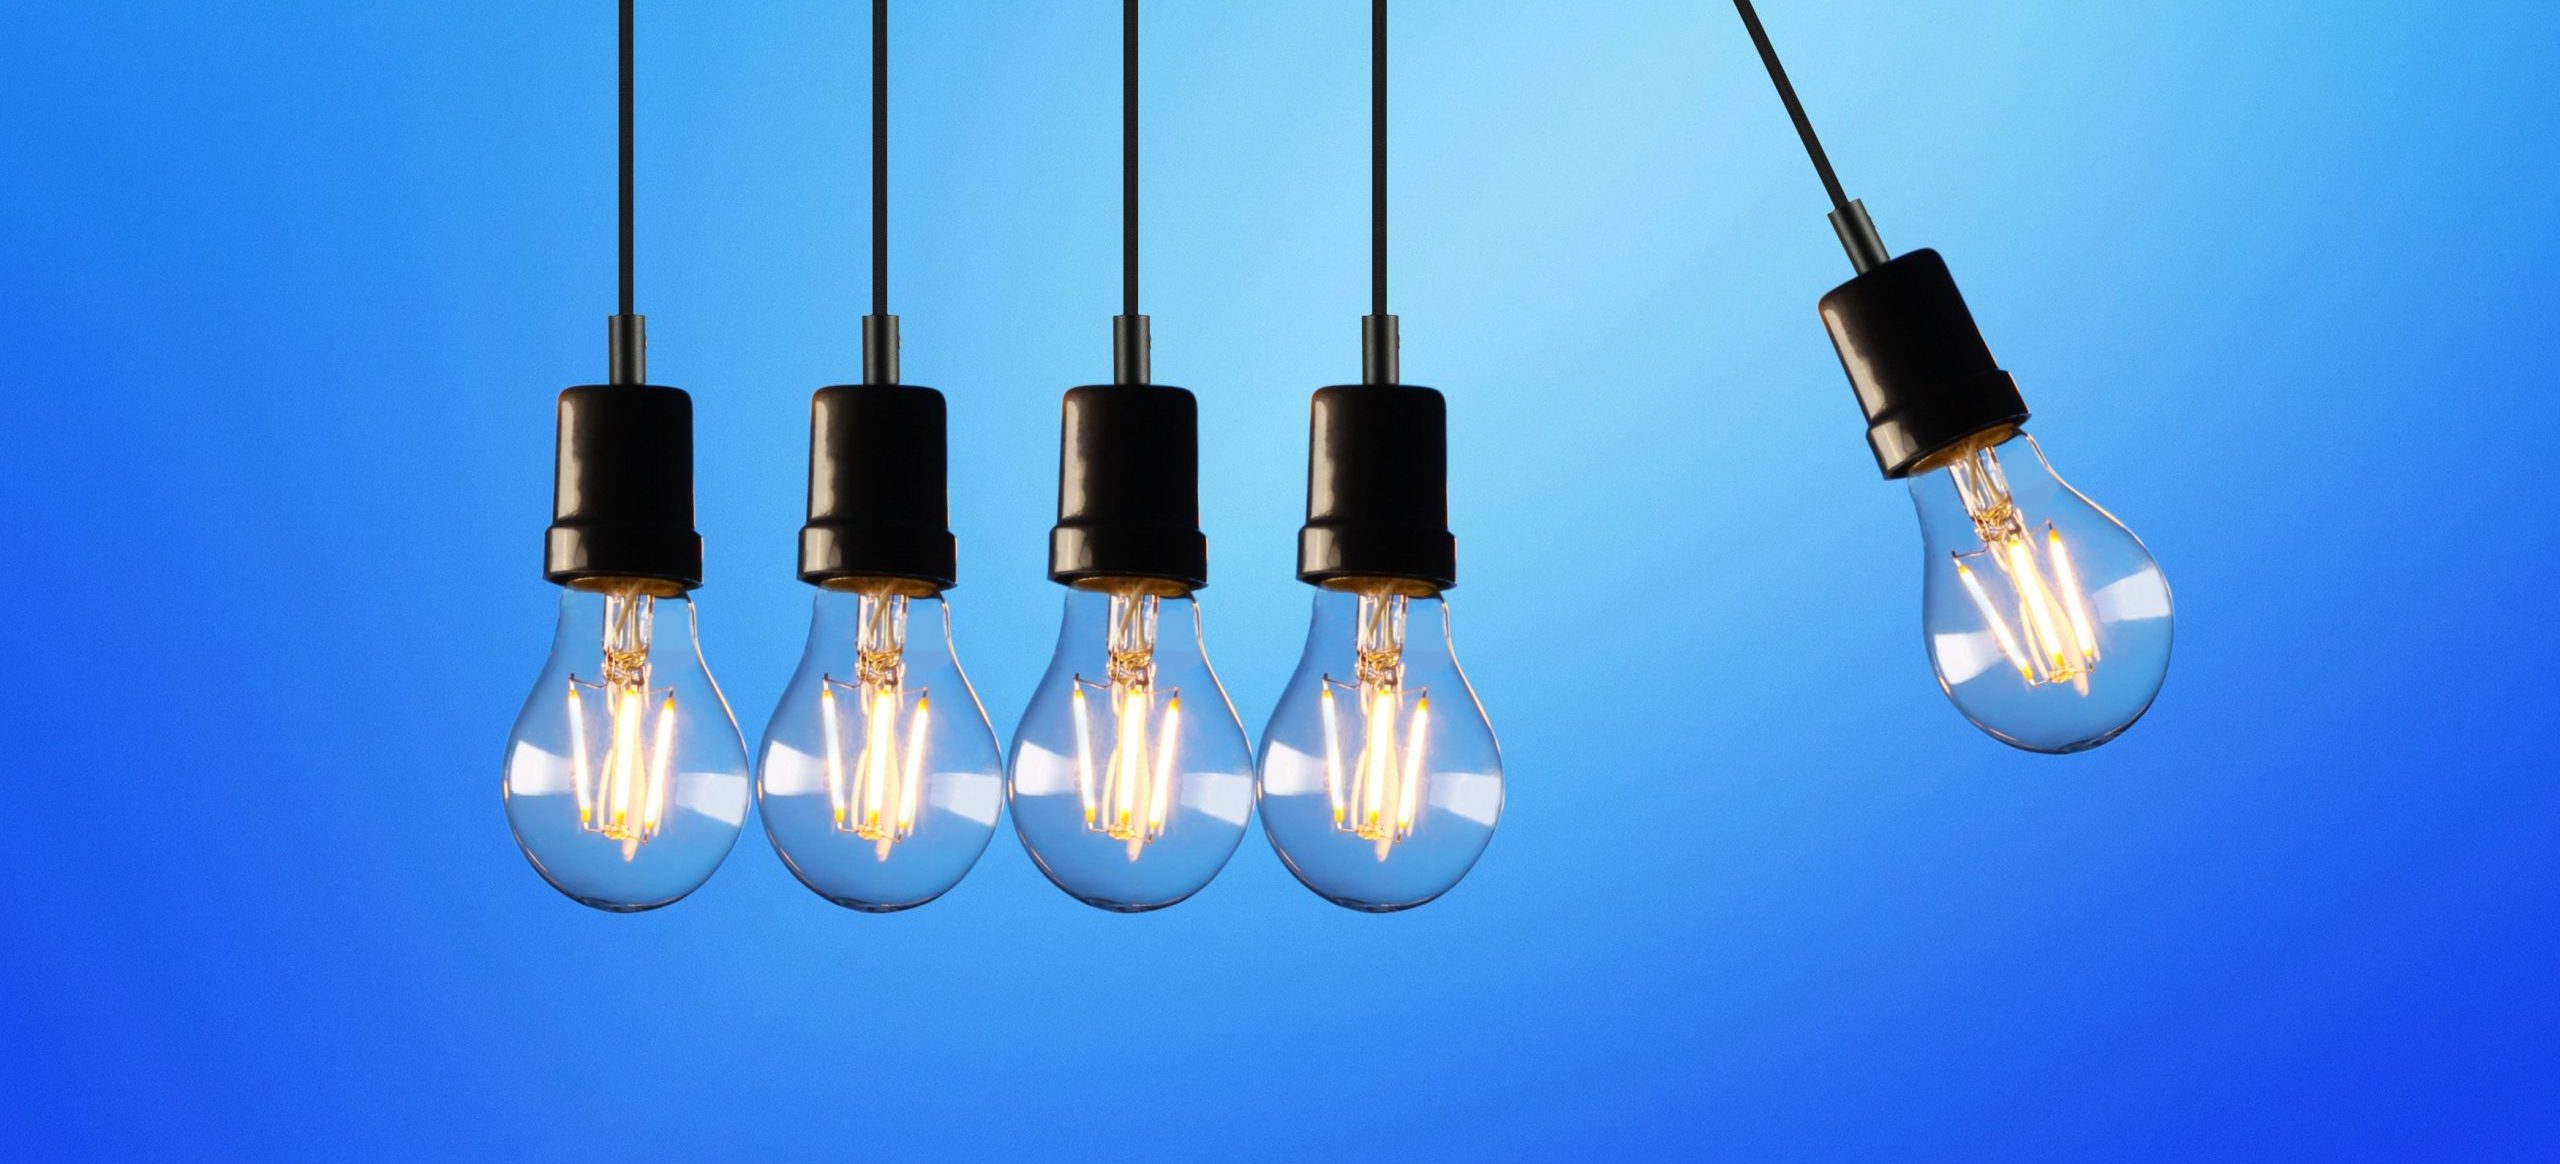 A Photo About Five Light Bulbs That Spark Content Creation